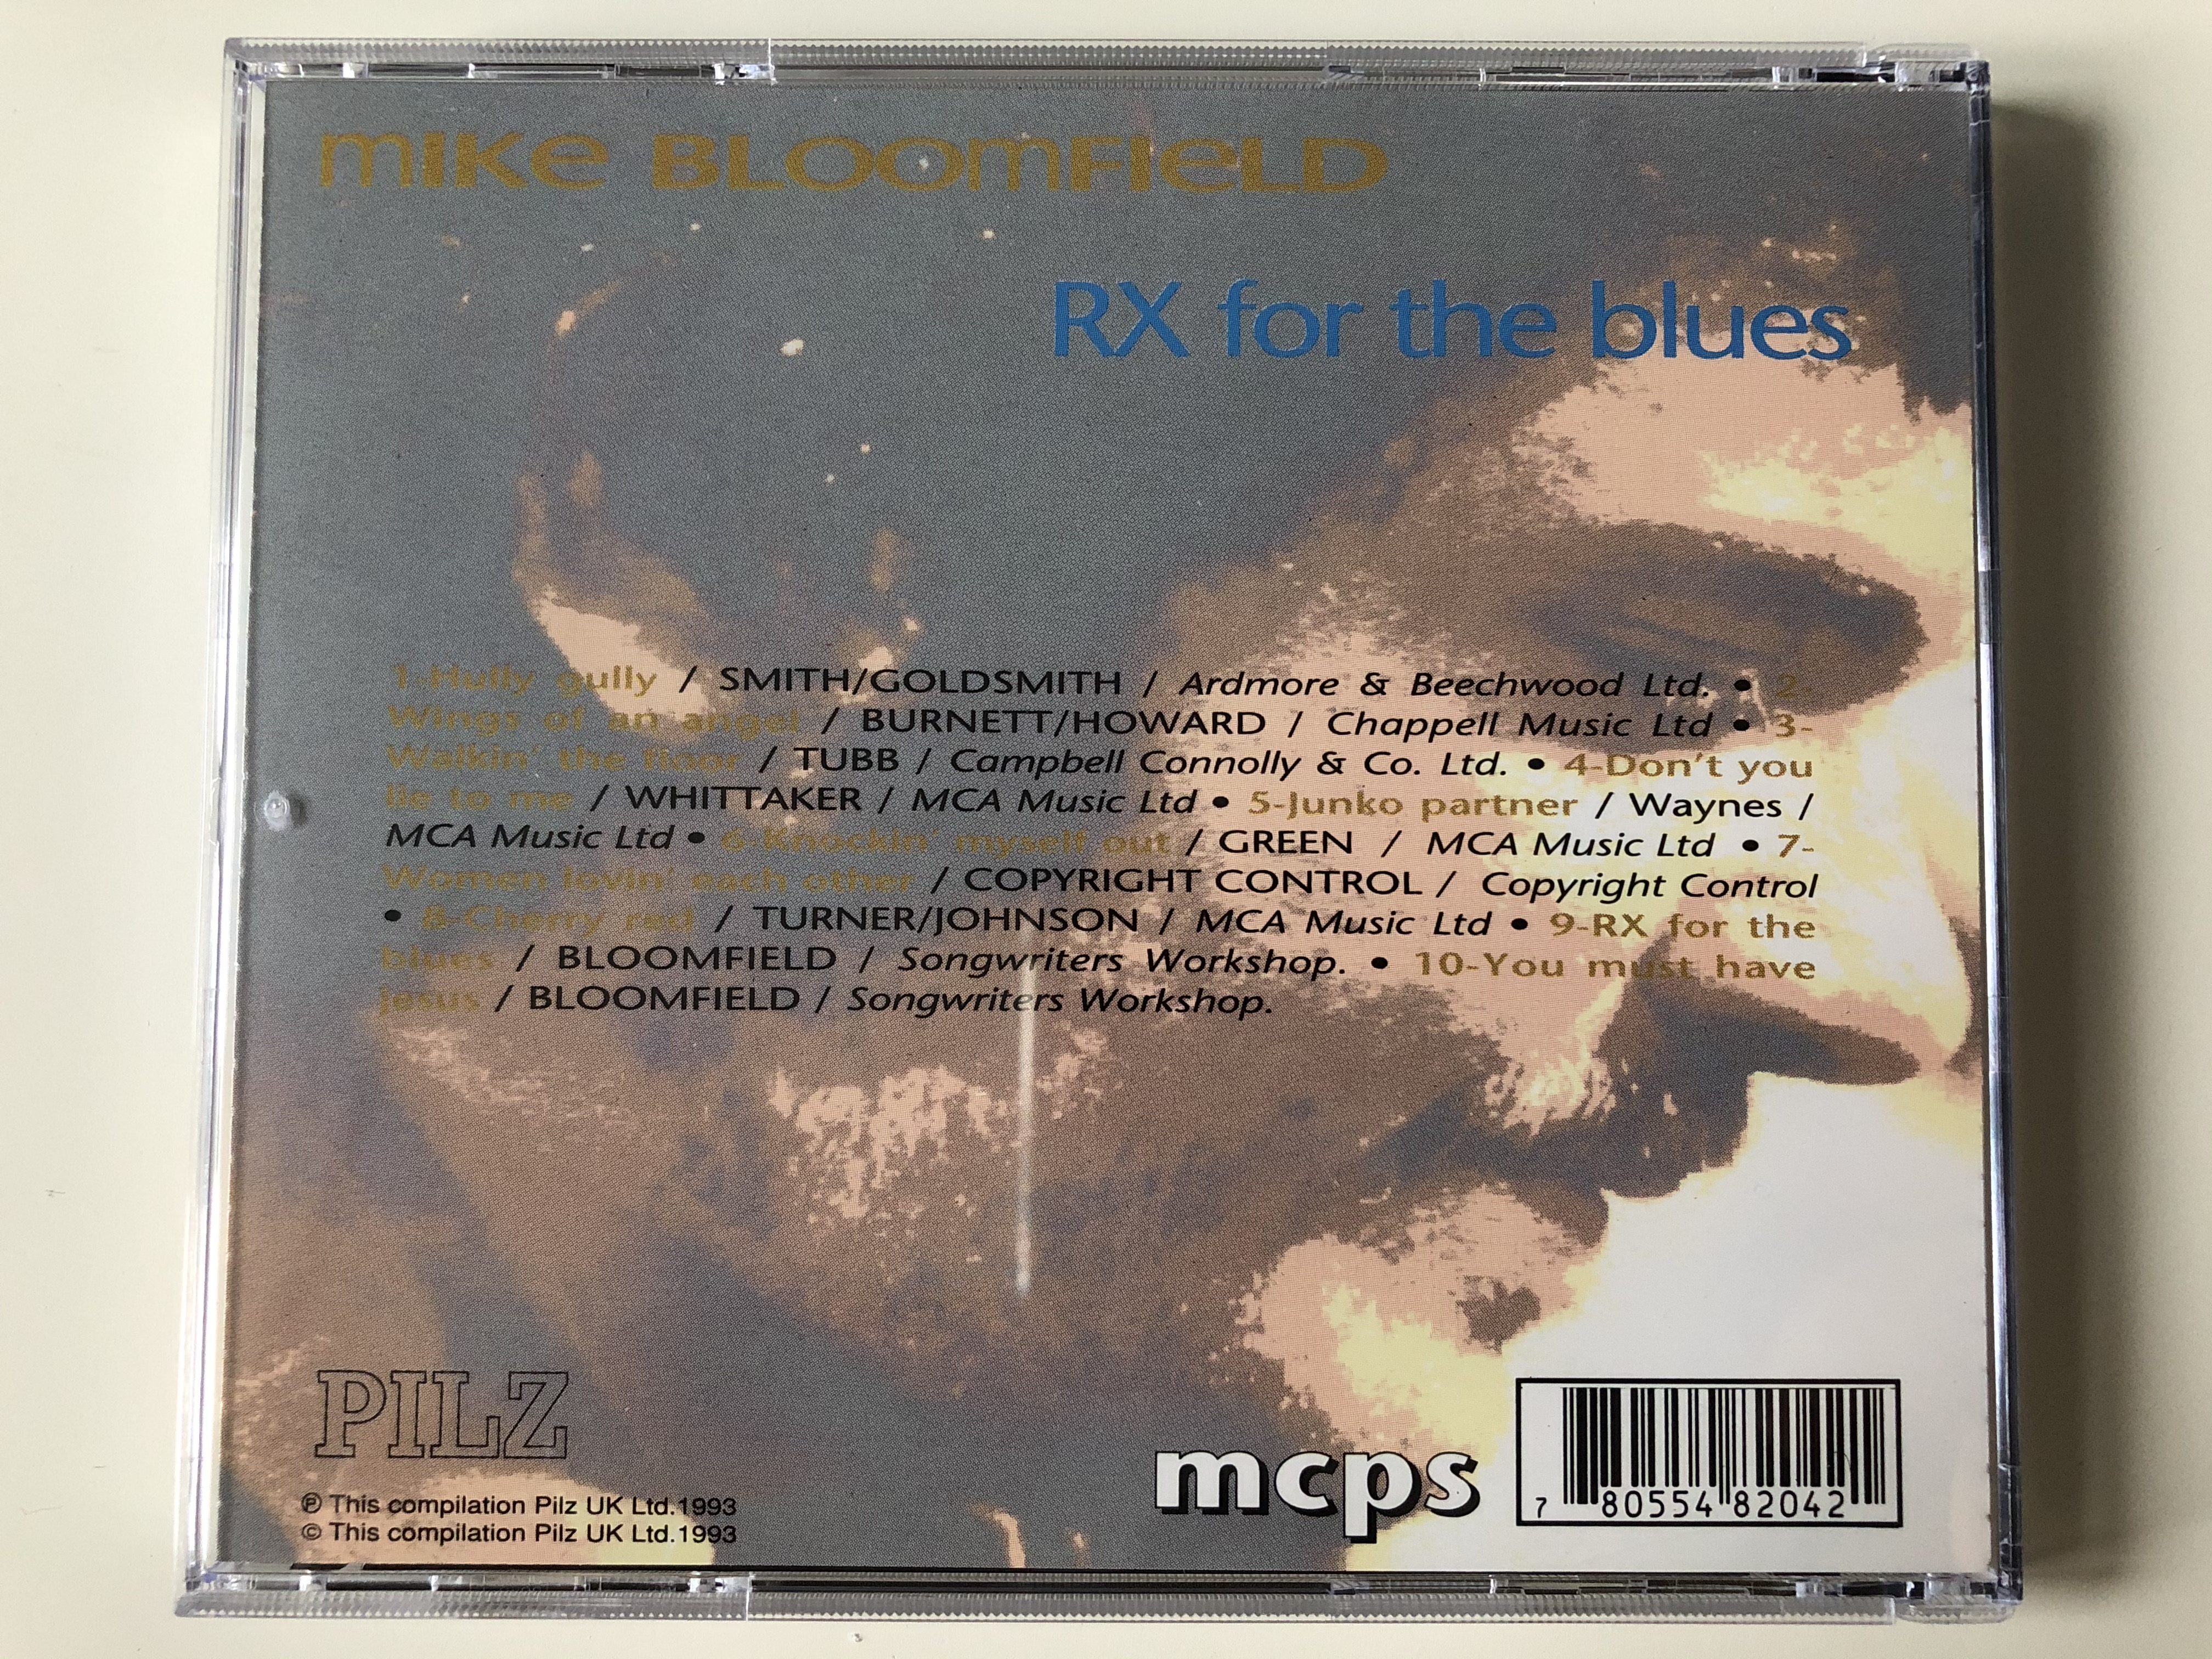 mike-bloomfield-rx-for-the-blues-pilz-audio-cd-1993-stereo-44-8204-2-5-.jpg